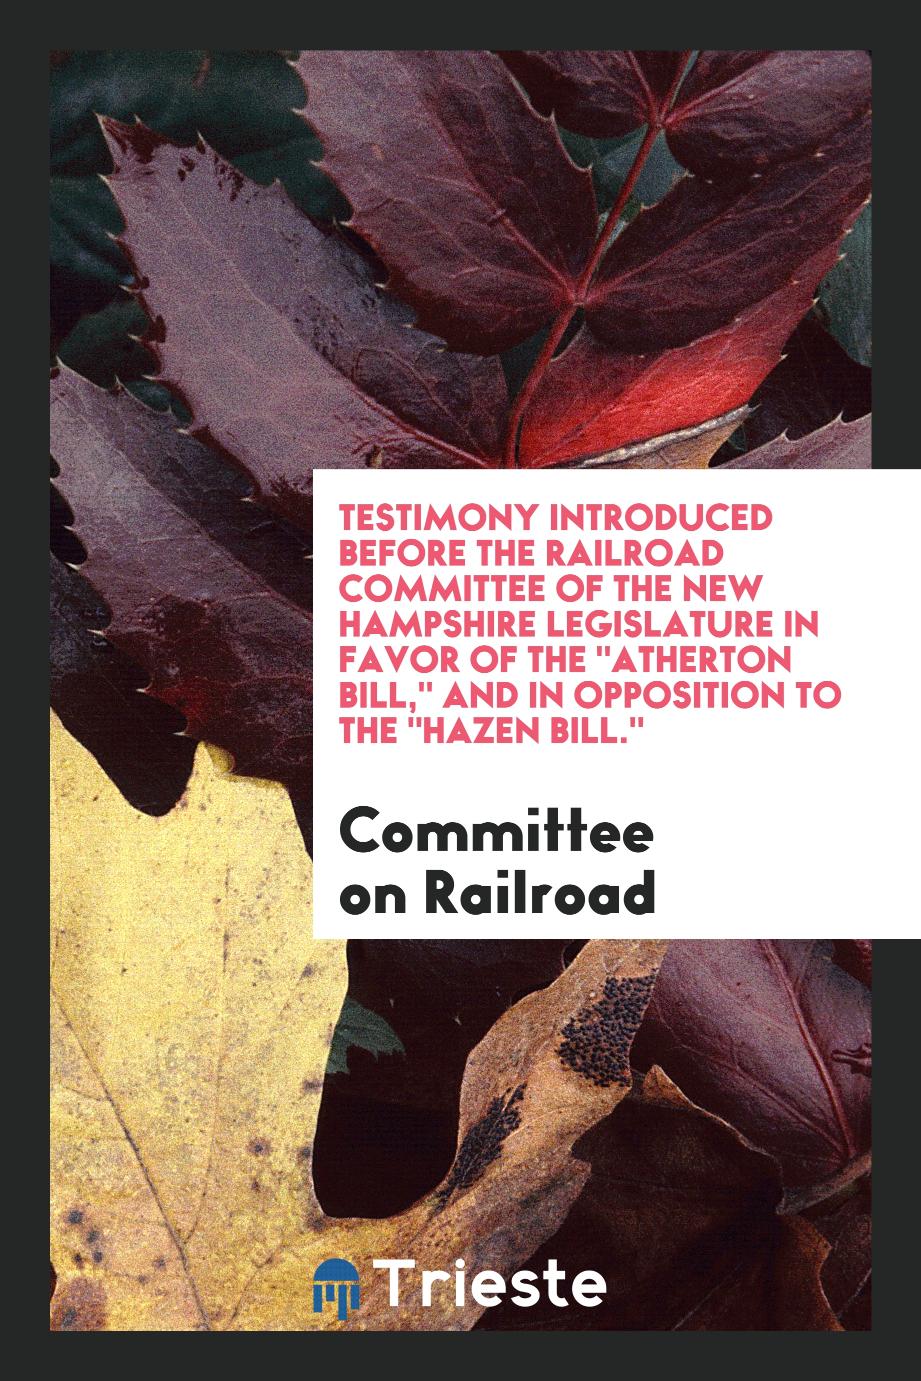 Testimony Introduced before the Railroad Committee of the New Hampshire Legislature in Favor of The "Atherton Bill," and in Opposition to The "Hazen Bill."